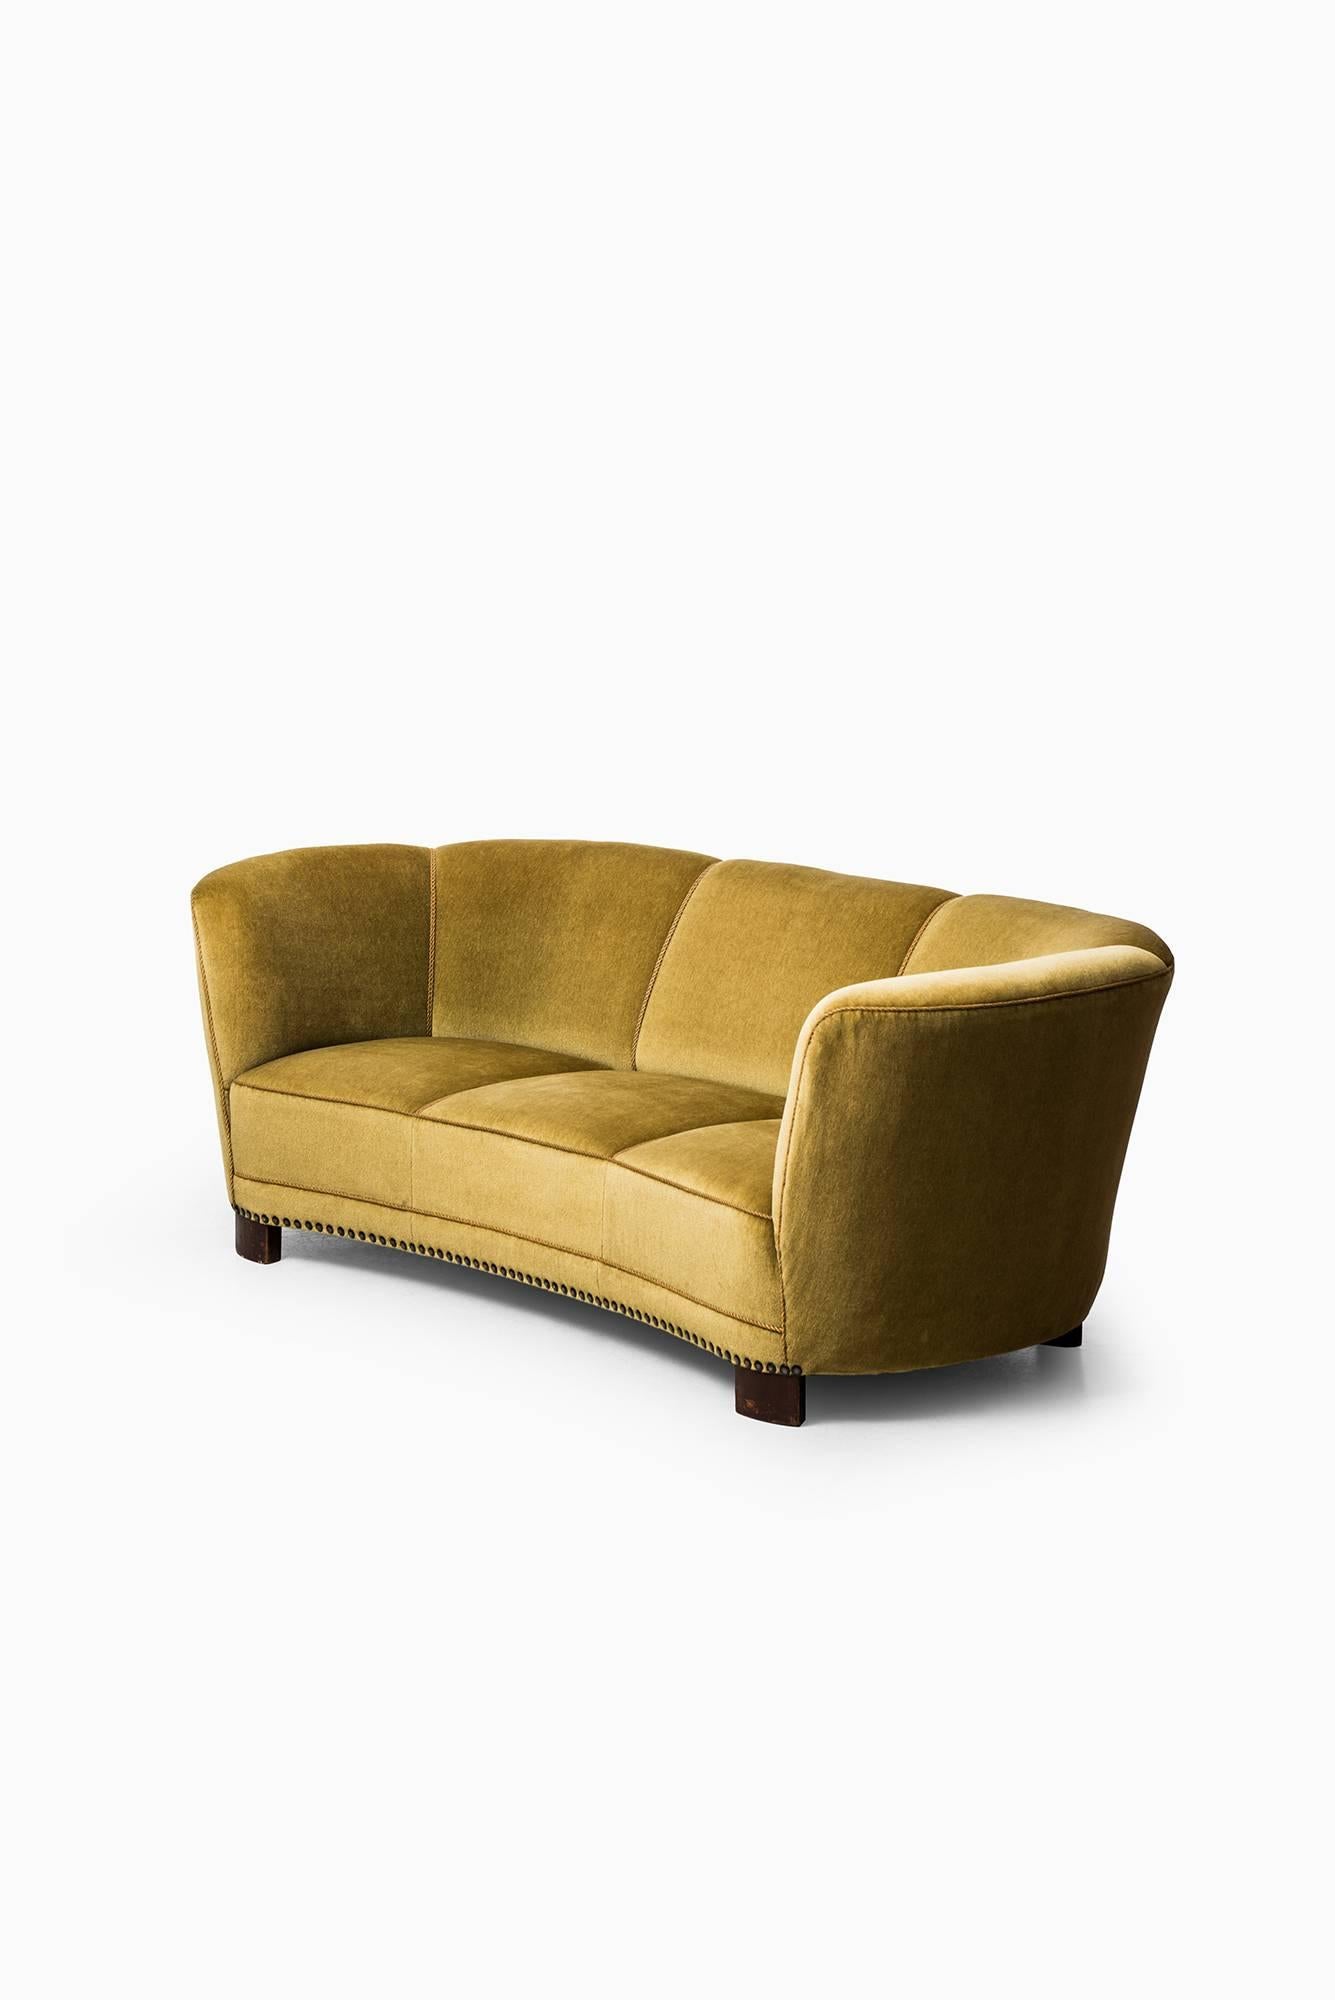 Large Curved Sofa in Green / Yellow Velvet Produced in Denmark 1